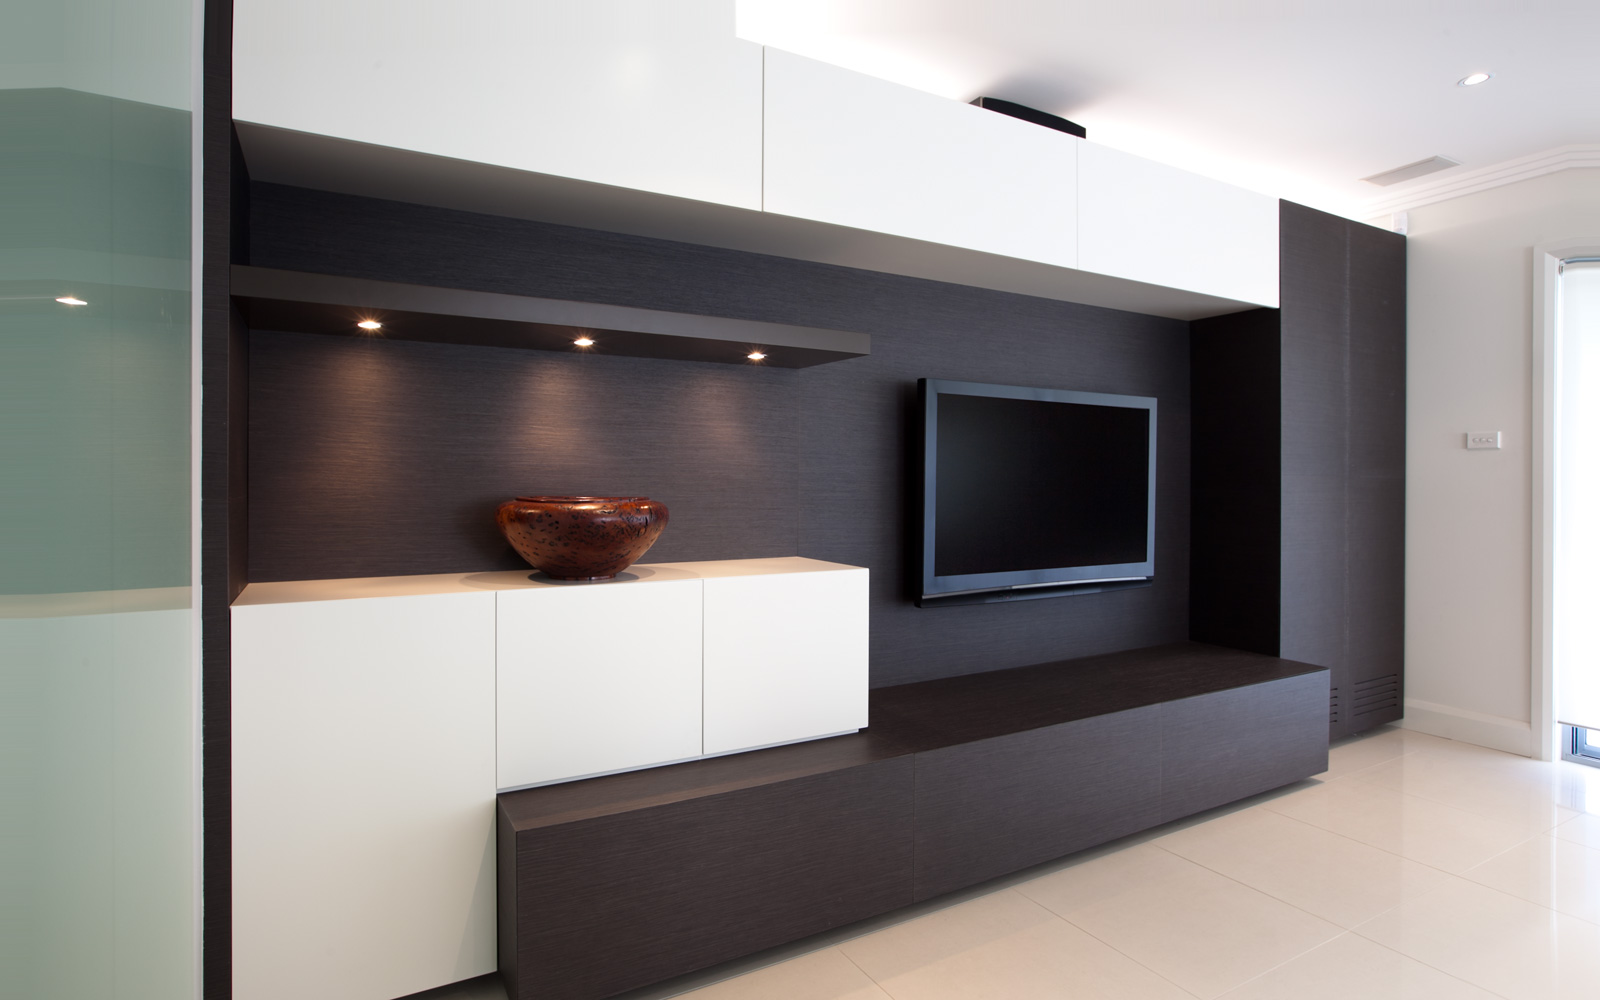 Putney Wall Unit Tv Cabinet Shelving Cupboards Space Joinery Sydney Custom Cabinet Maker Img 0089 1600x1000 Space Joinery Sydney Cabinet Maker Kitchens Bathrooms Wardrobesspace Joinery Sydney Cabinet Maker Kitchens Bathrooms Wardrobes